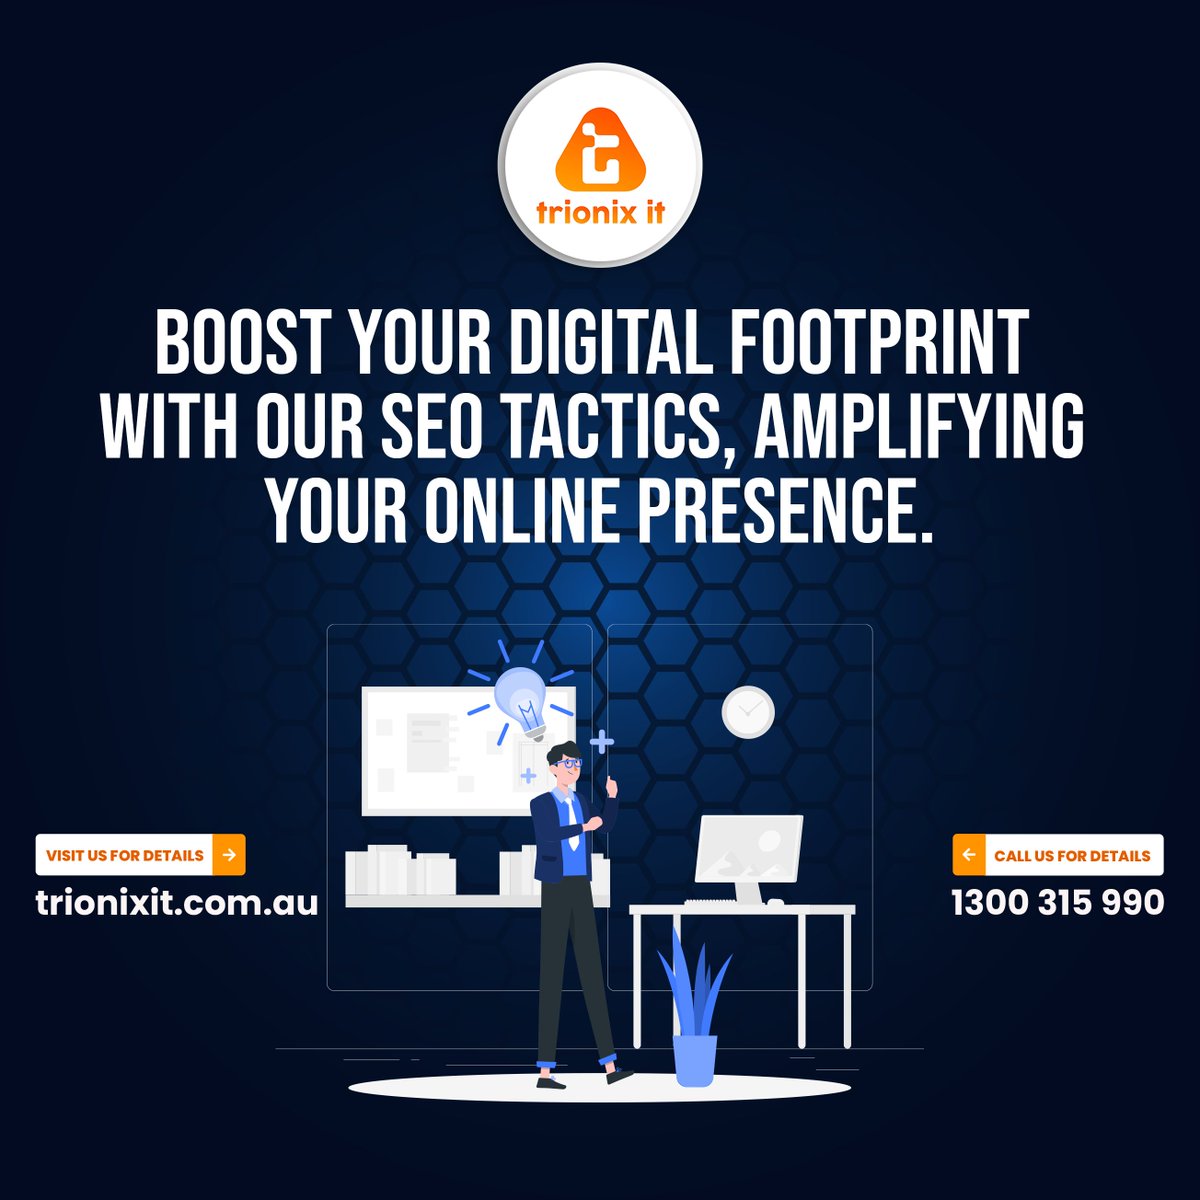 Maximize your online reach with our cutting-edge #SEOStrategies, elevating your #DigitalFootprint and expanding your #OnlinePresence. Let's enhance your visibility with targeted #SEO tactics! 🚀

#DigitalMarketing #SEOBoost #OnlineVisibility